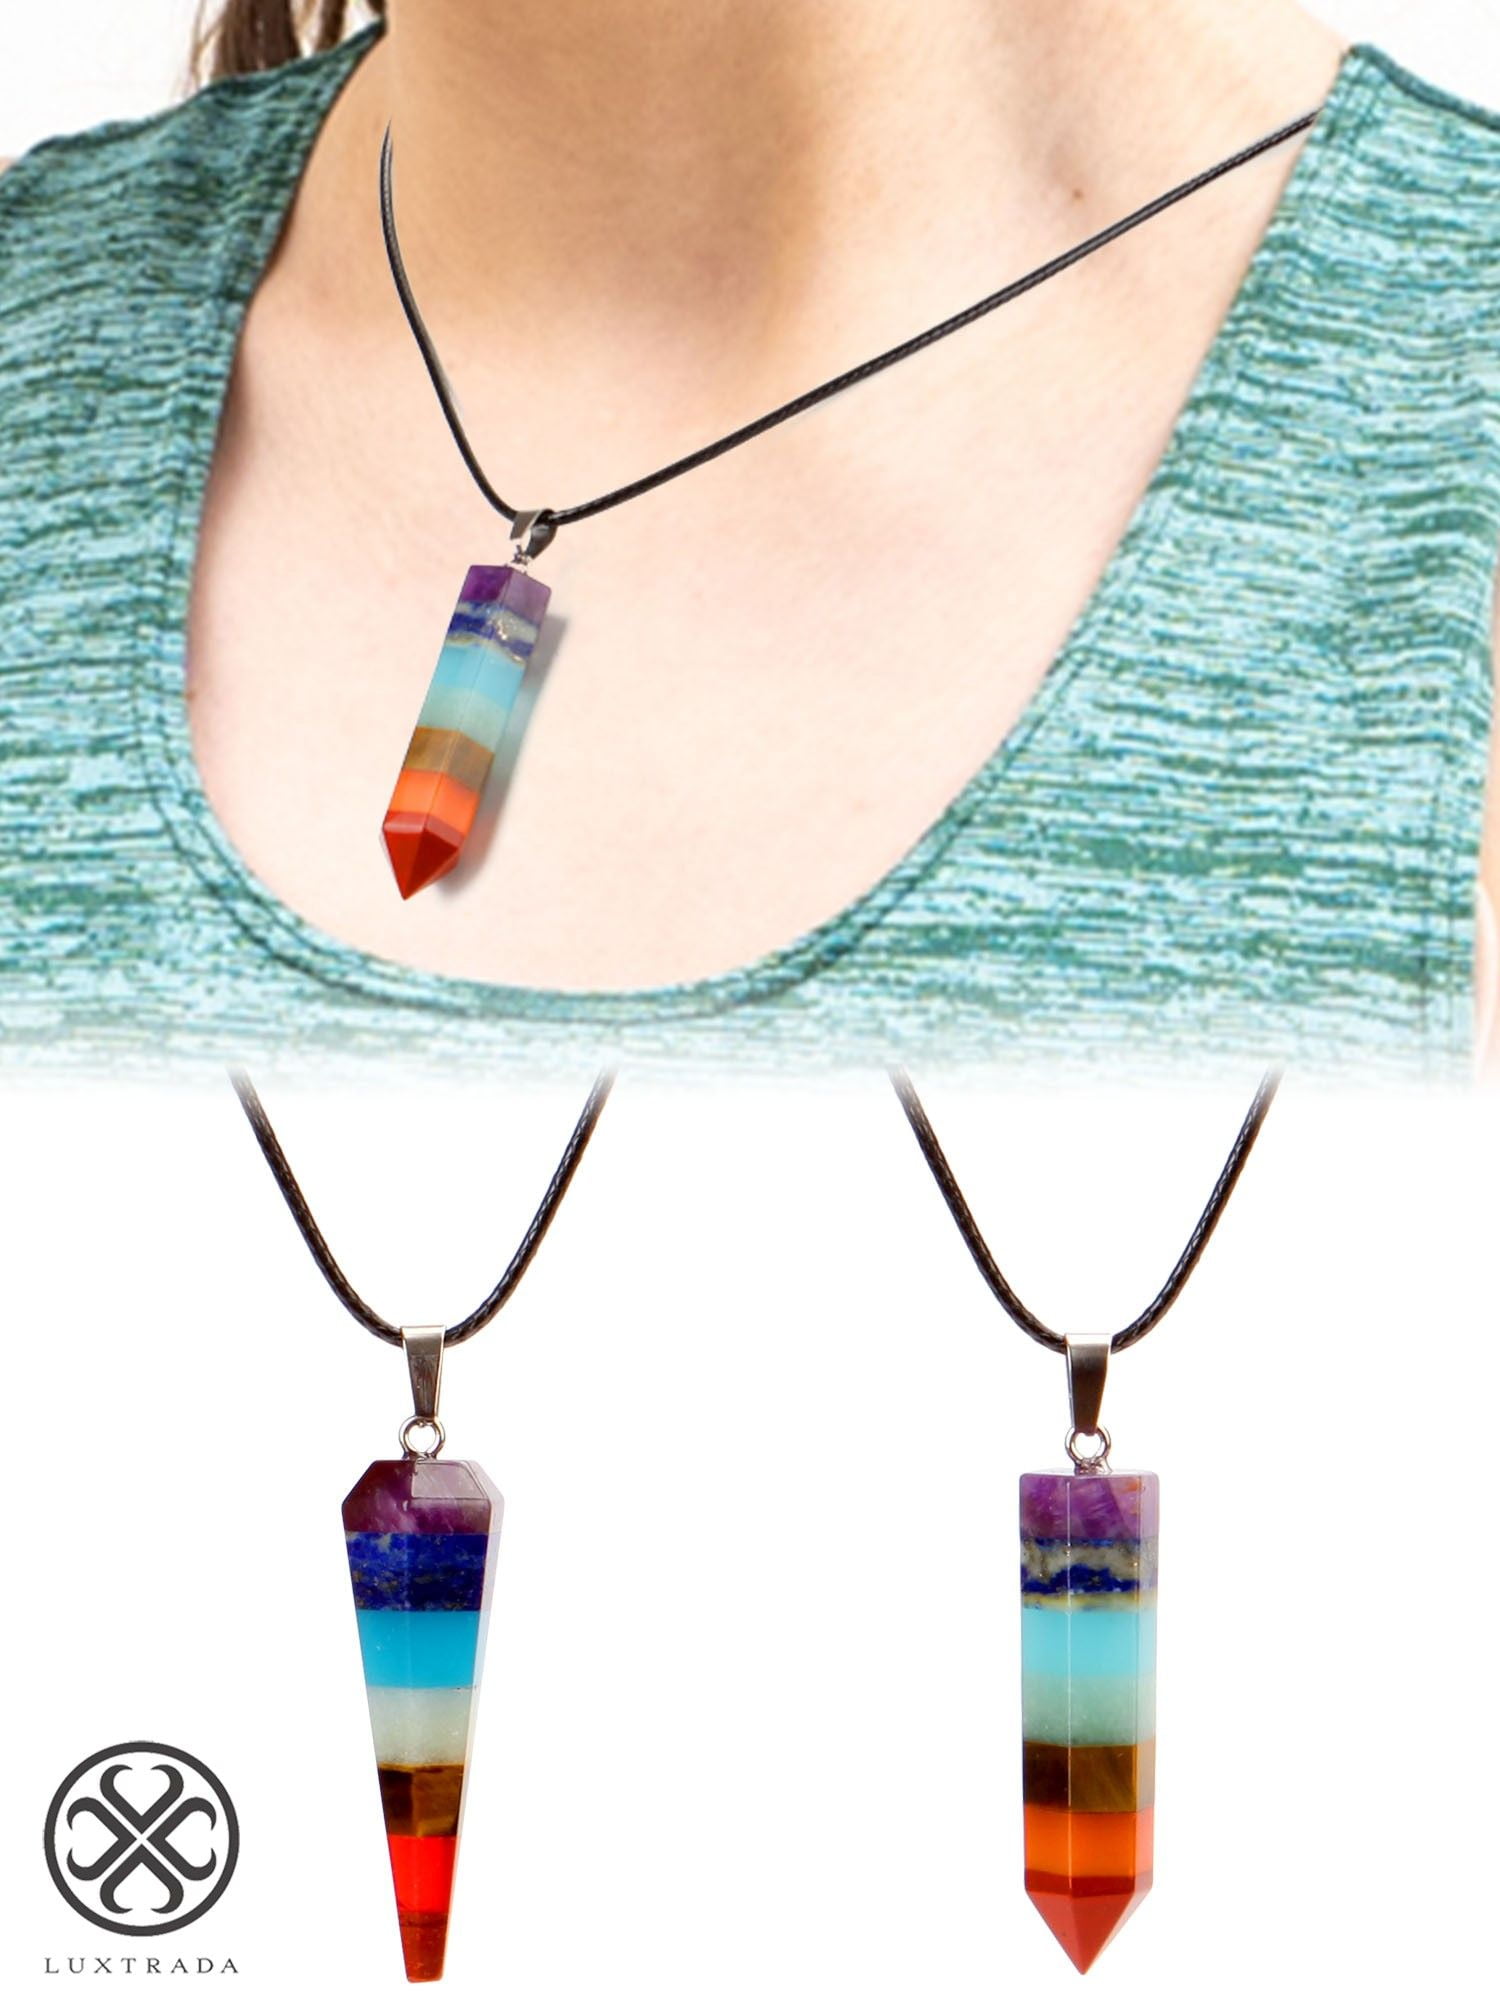 Gemstone Pendulums for Dowsing 12 Types of Crystal Divination and Healing 